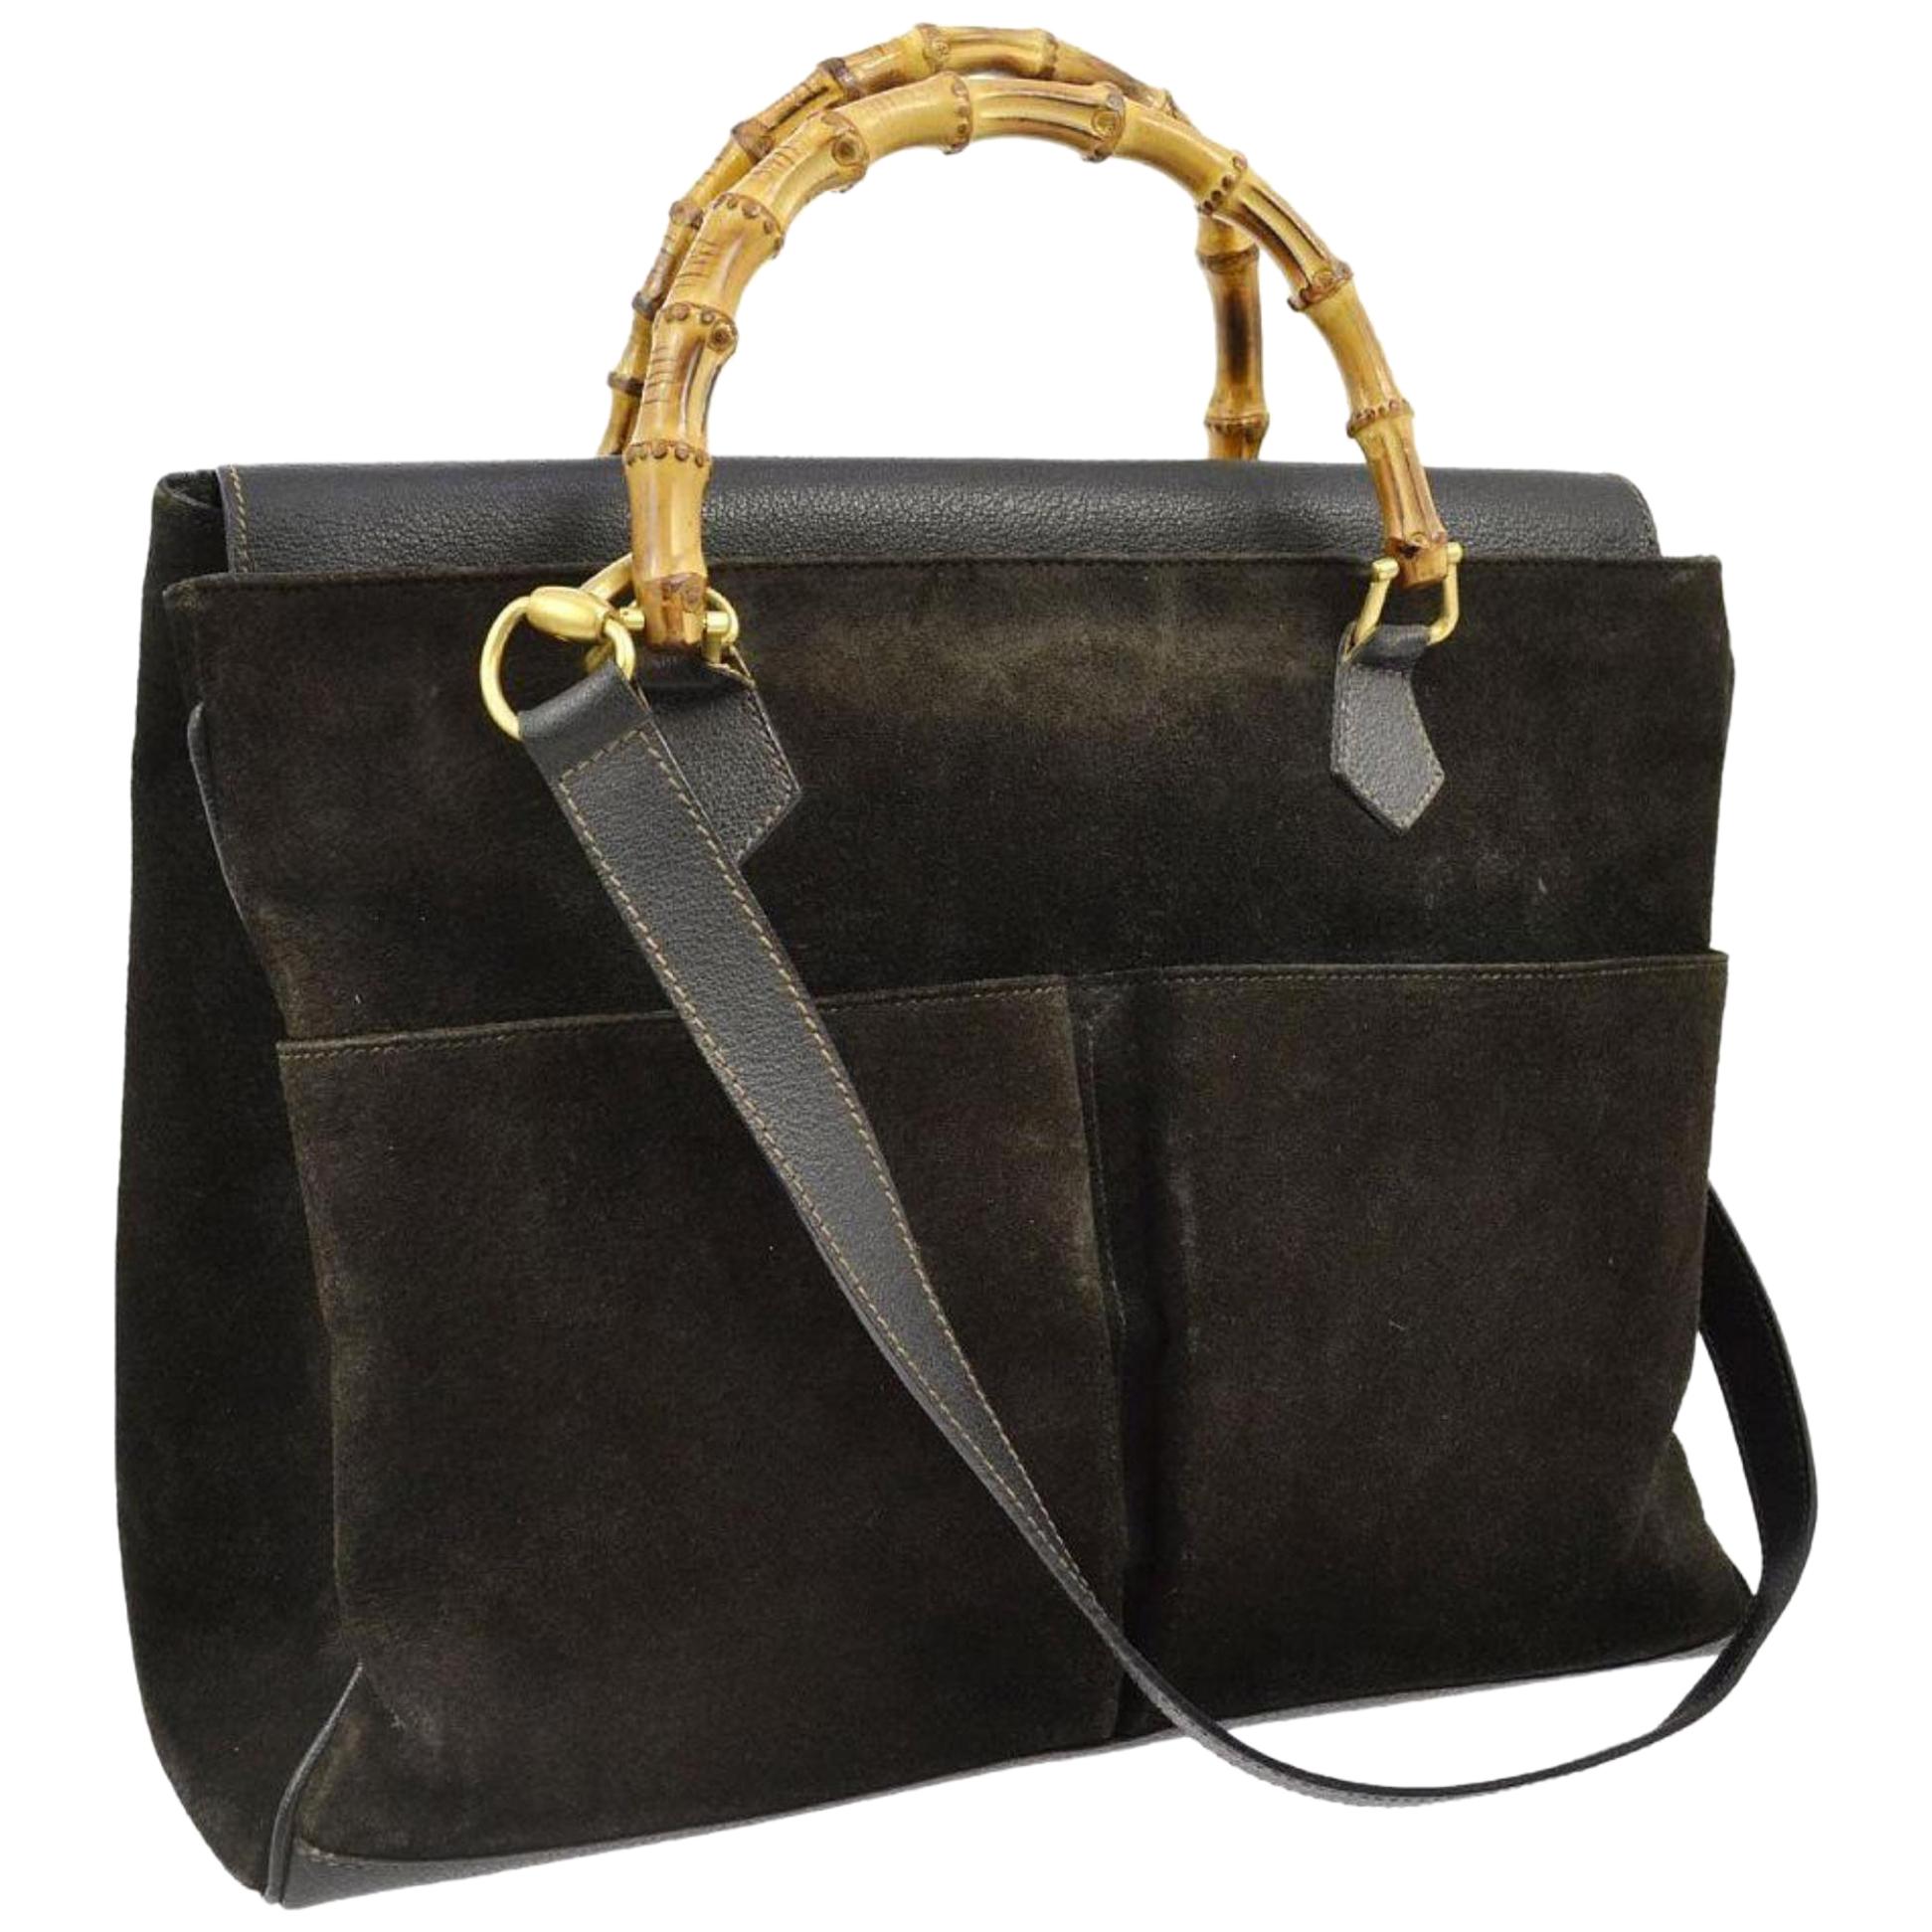 Gucci Bamboo 2way Tote 870382 Black Suede Leather Shoulder Bag For Sale